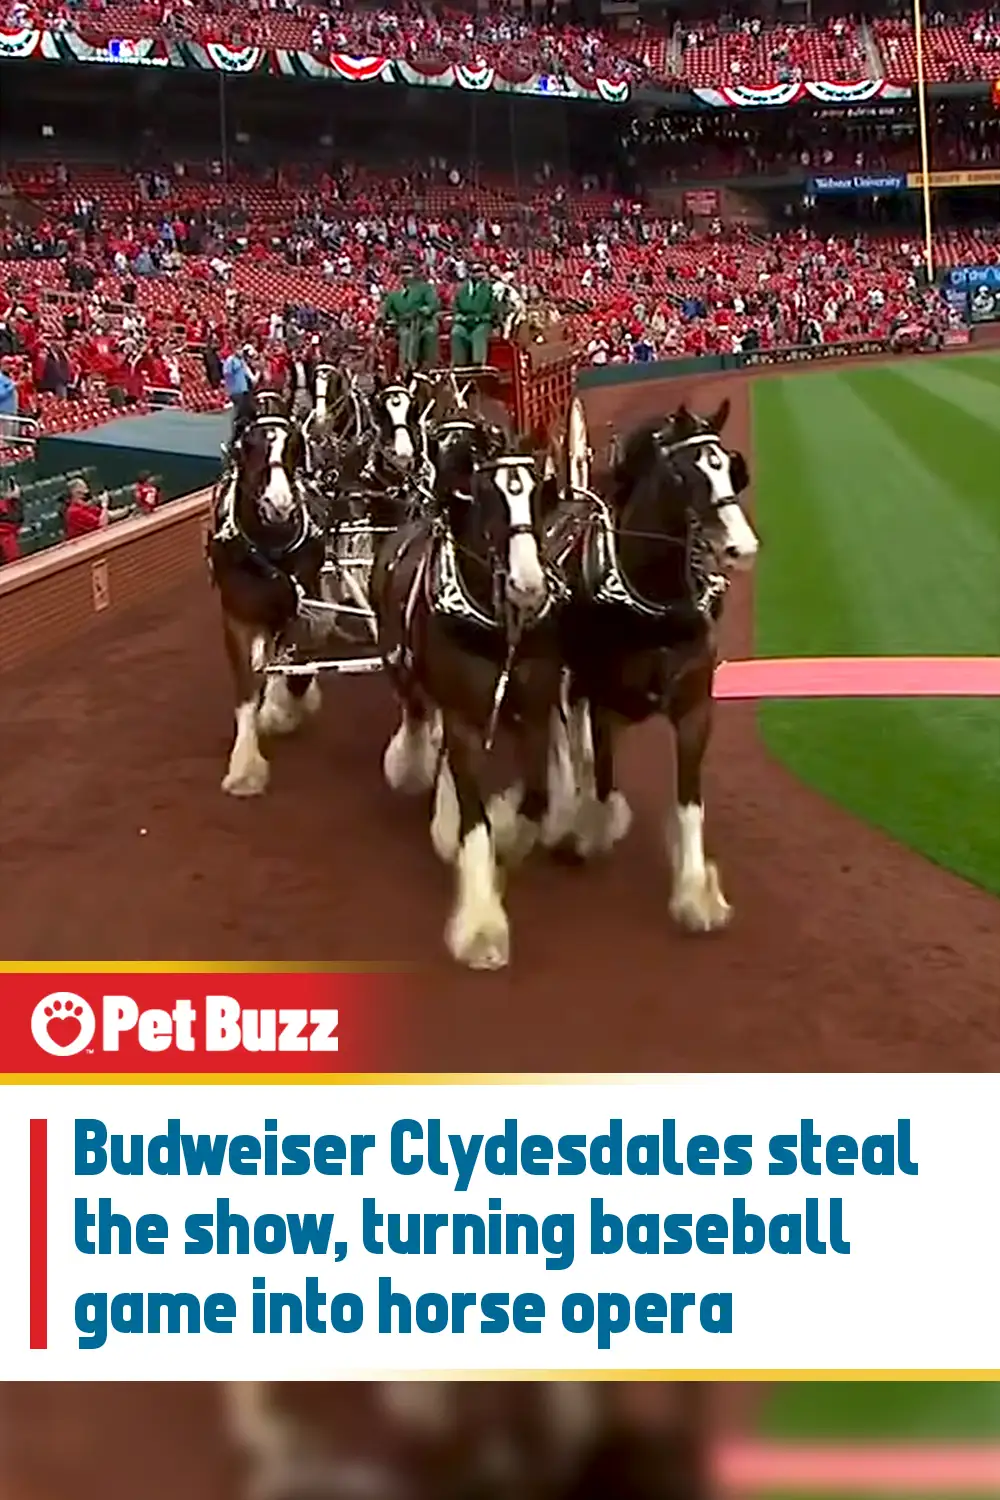 Budweiser Clydesdales steal the show, turning baseball game into horse opera